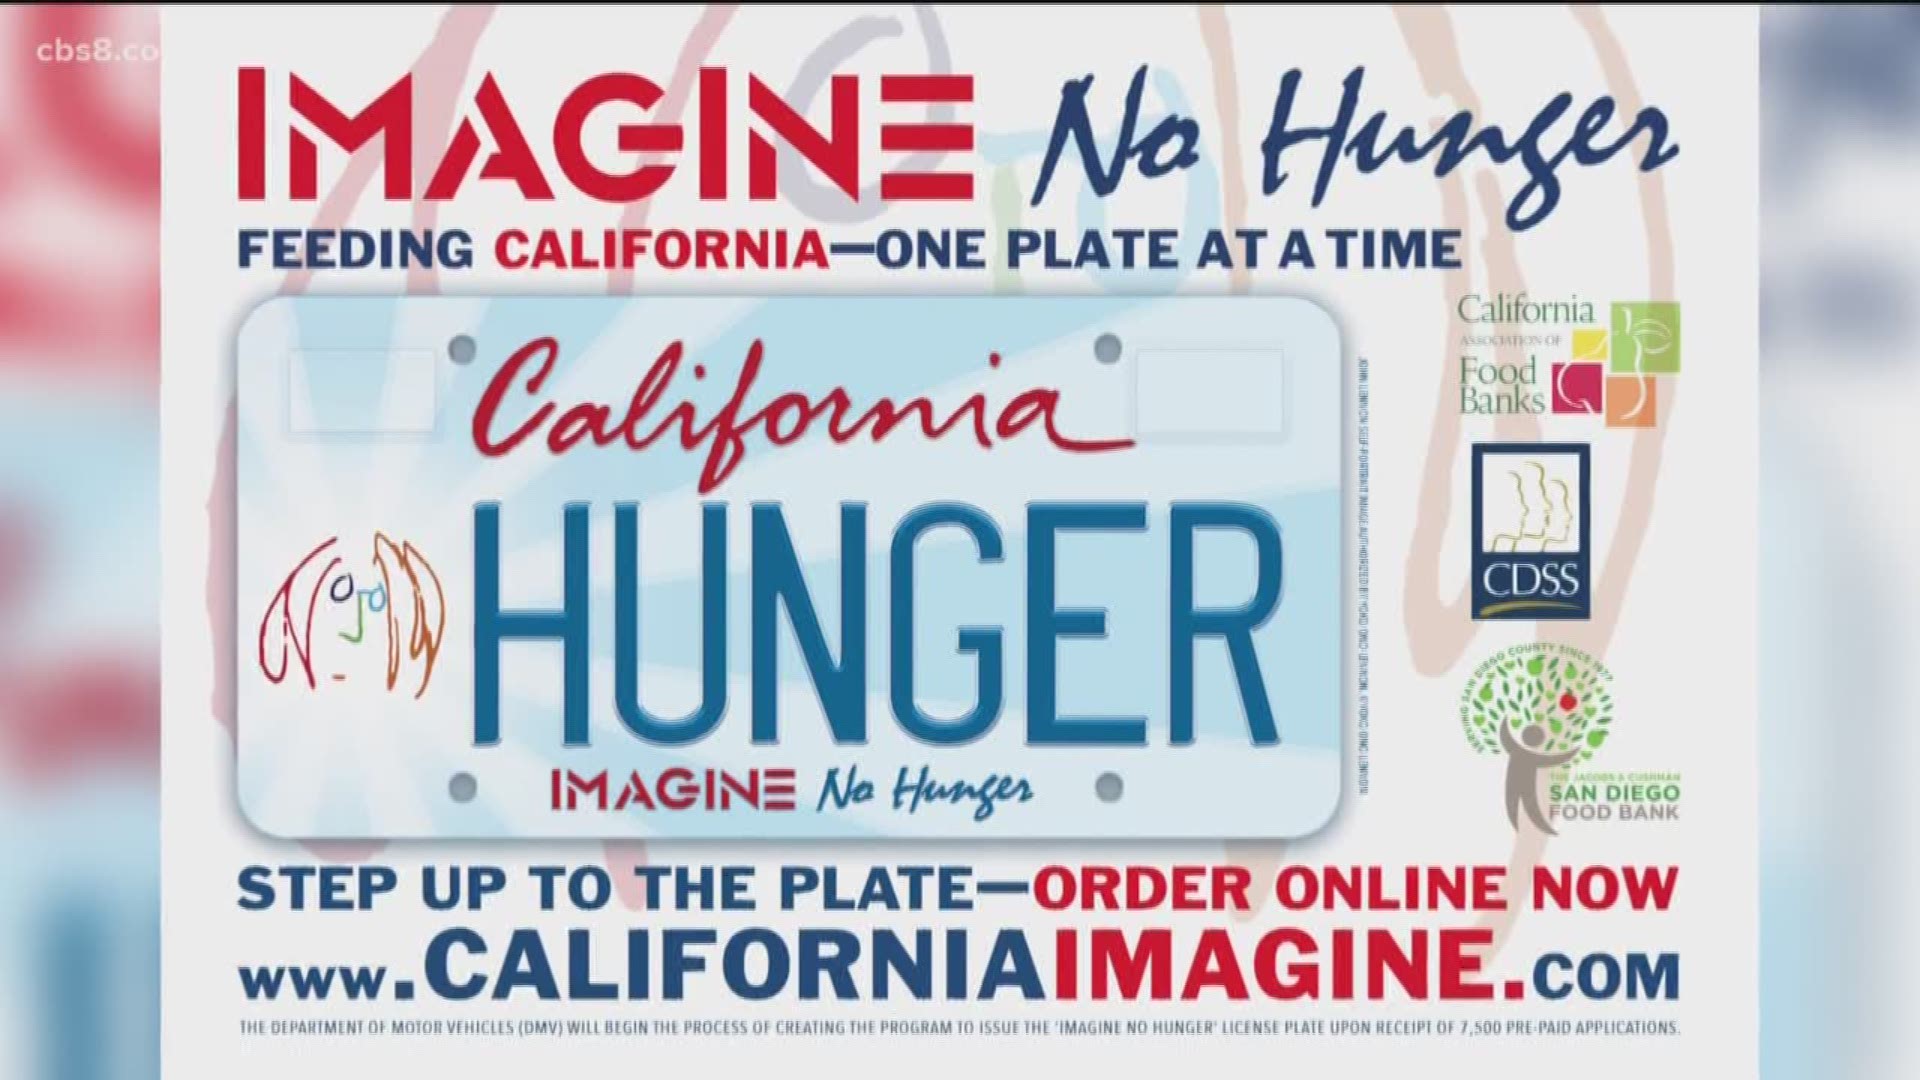 New “Imagine No Hunger” license plates inspired by legendary musician and activist John Lennon are being sold to support California foods banks.